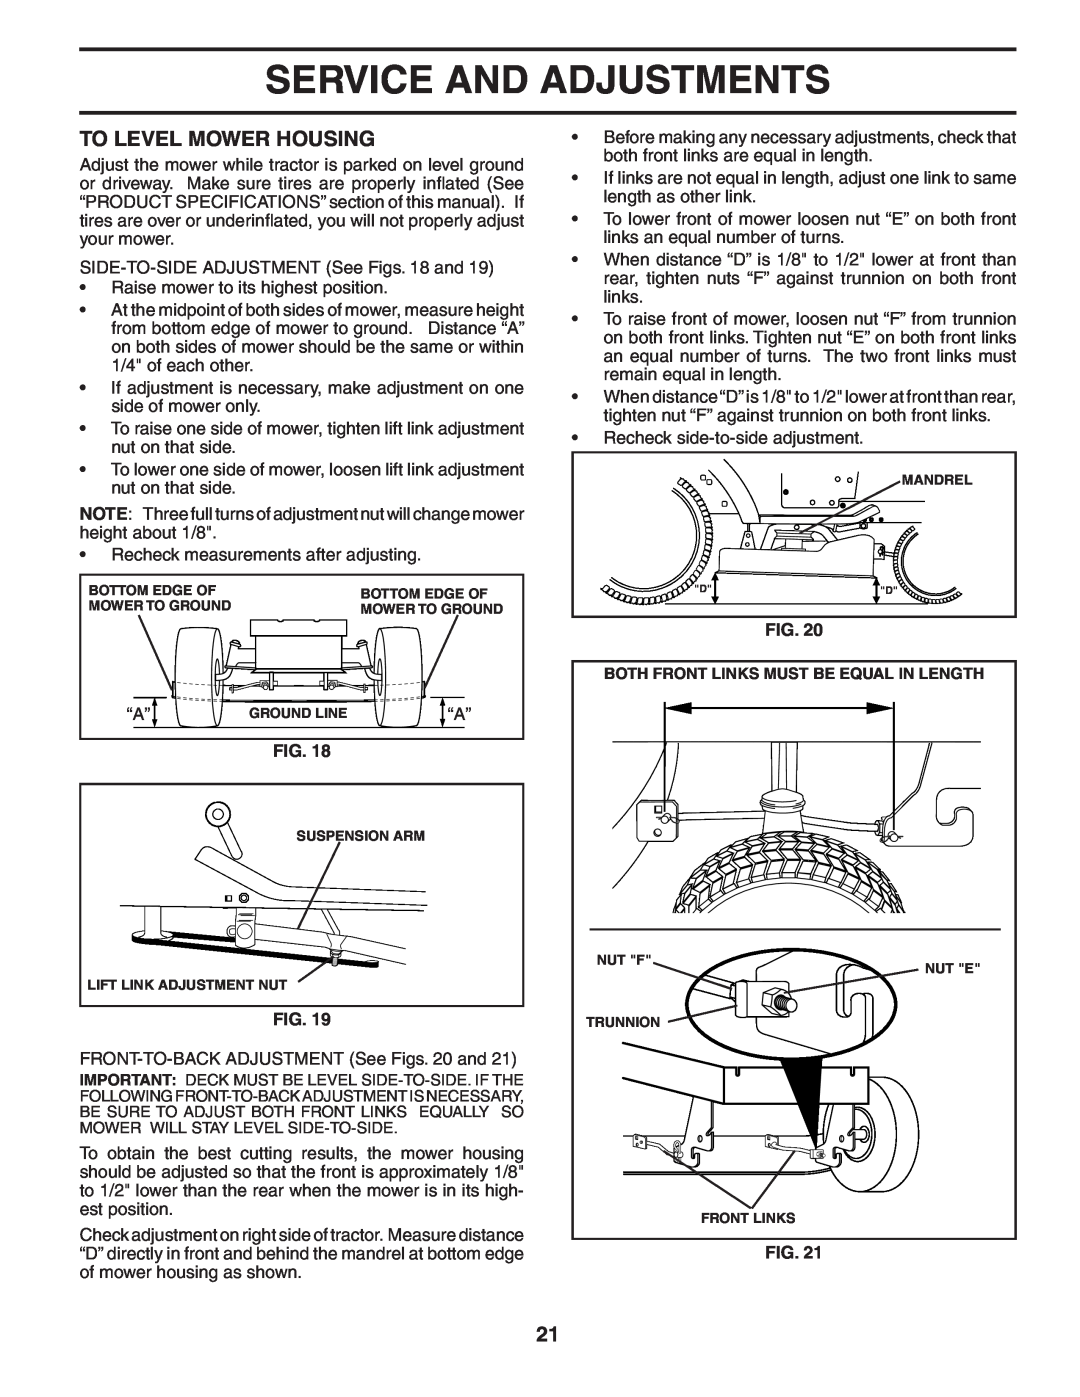 Poulan PD22H42STC owner manual To Level Mower Housing, Service And Adjustments, Both Front Links Must Be Equal In Length 